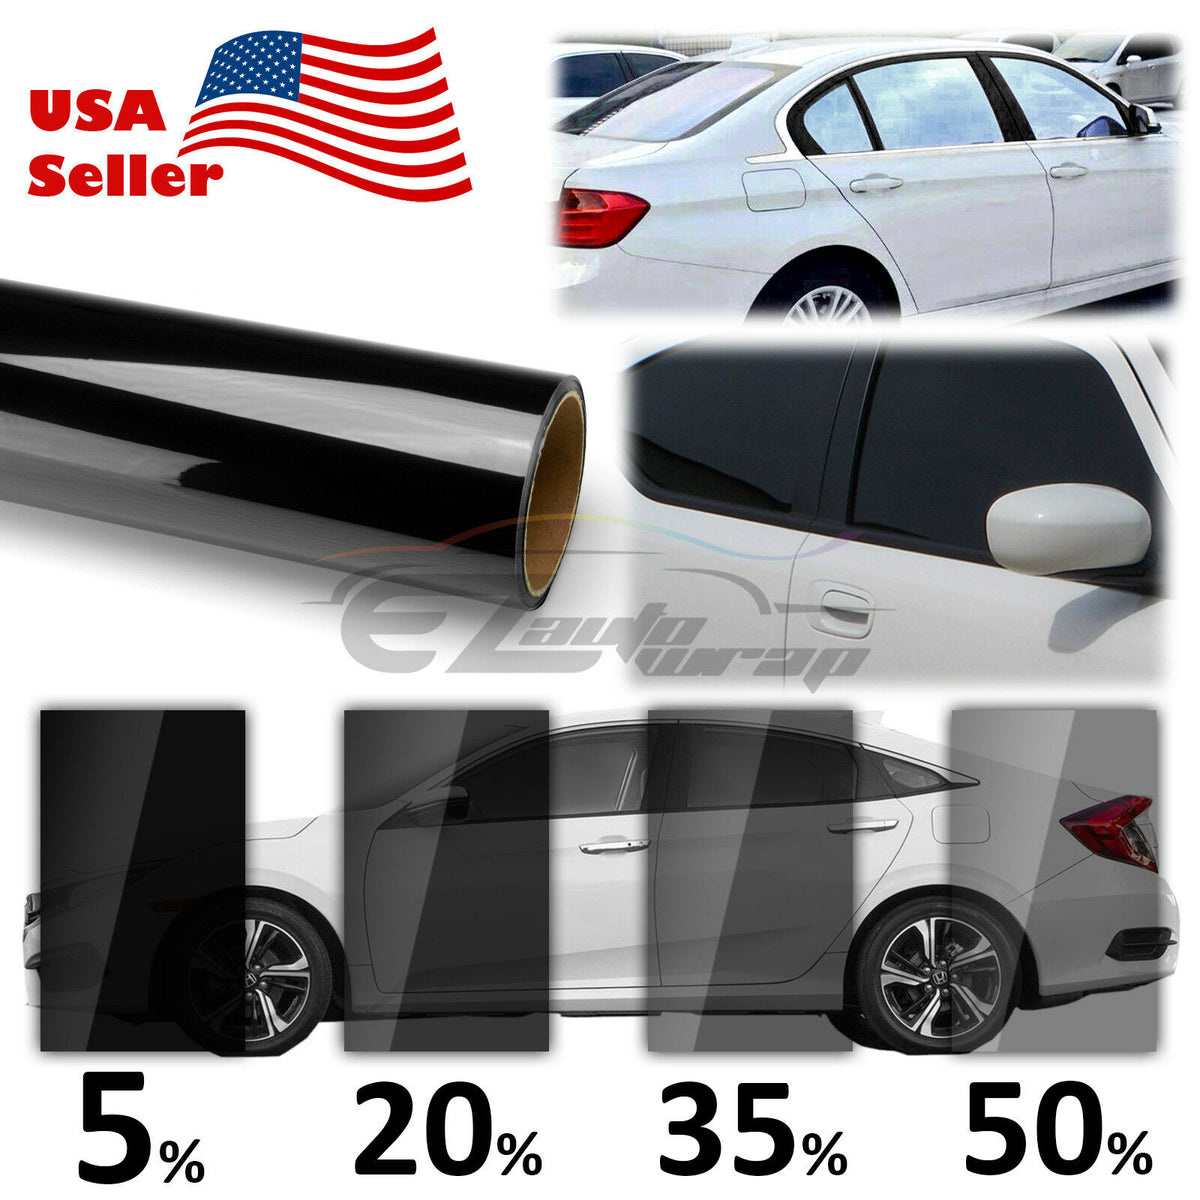 OTOLIMAN OtoLimanPrime Uncut Roll Window Tint Film UV%15 Dark Black 20 Inchx20Ft 20inc x 240inc Car Home Office Glass Scratch Resistant Film,for Privacy and Heat Reduction 